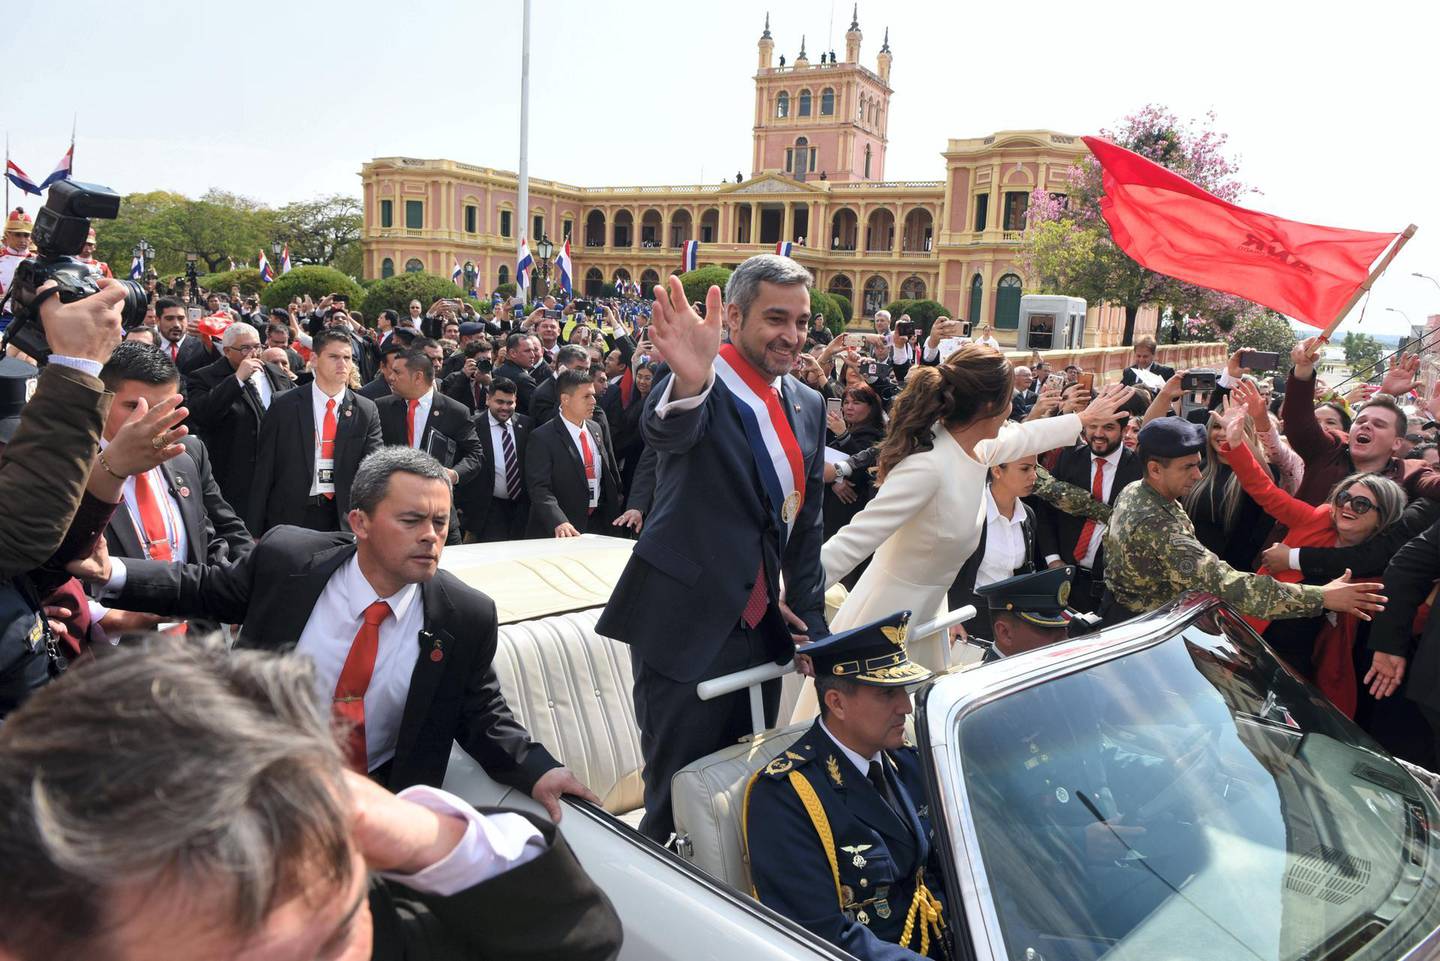 Paraguay's new President Mario Abdo Benitez and his wife Silvana Lopez head to the Cathedral on a 1967 Cadillac convertible after the swearing-in ceremony at the presidential palace in Asuncion, on August 15, 2018. / AFP PHOTO / Daniel DUARTE